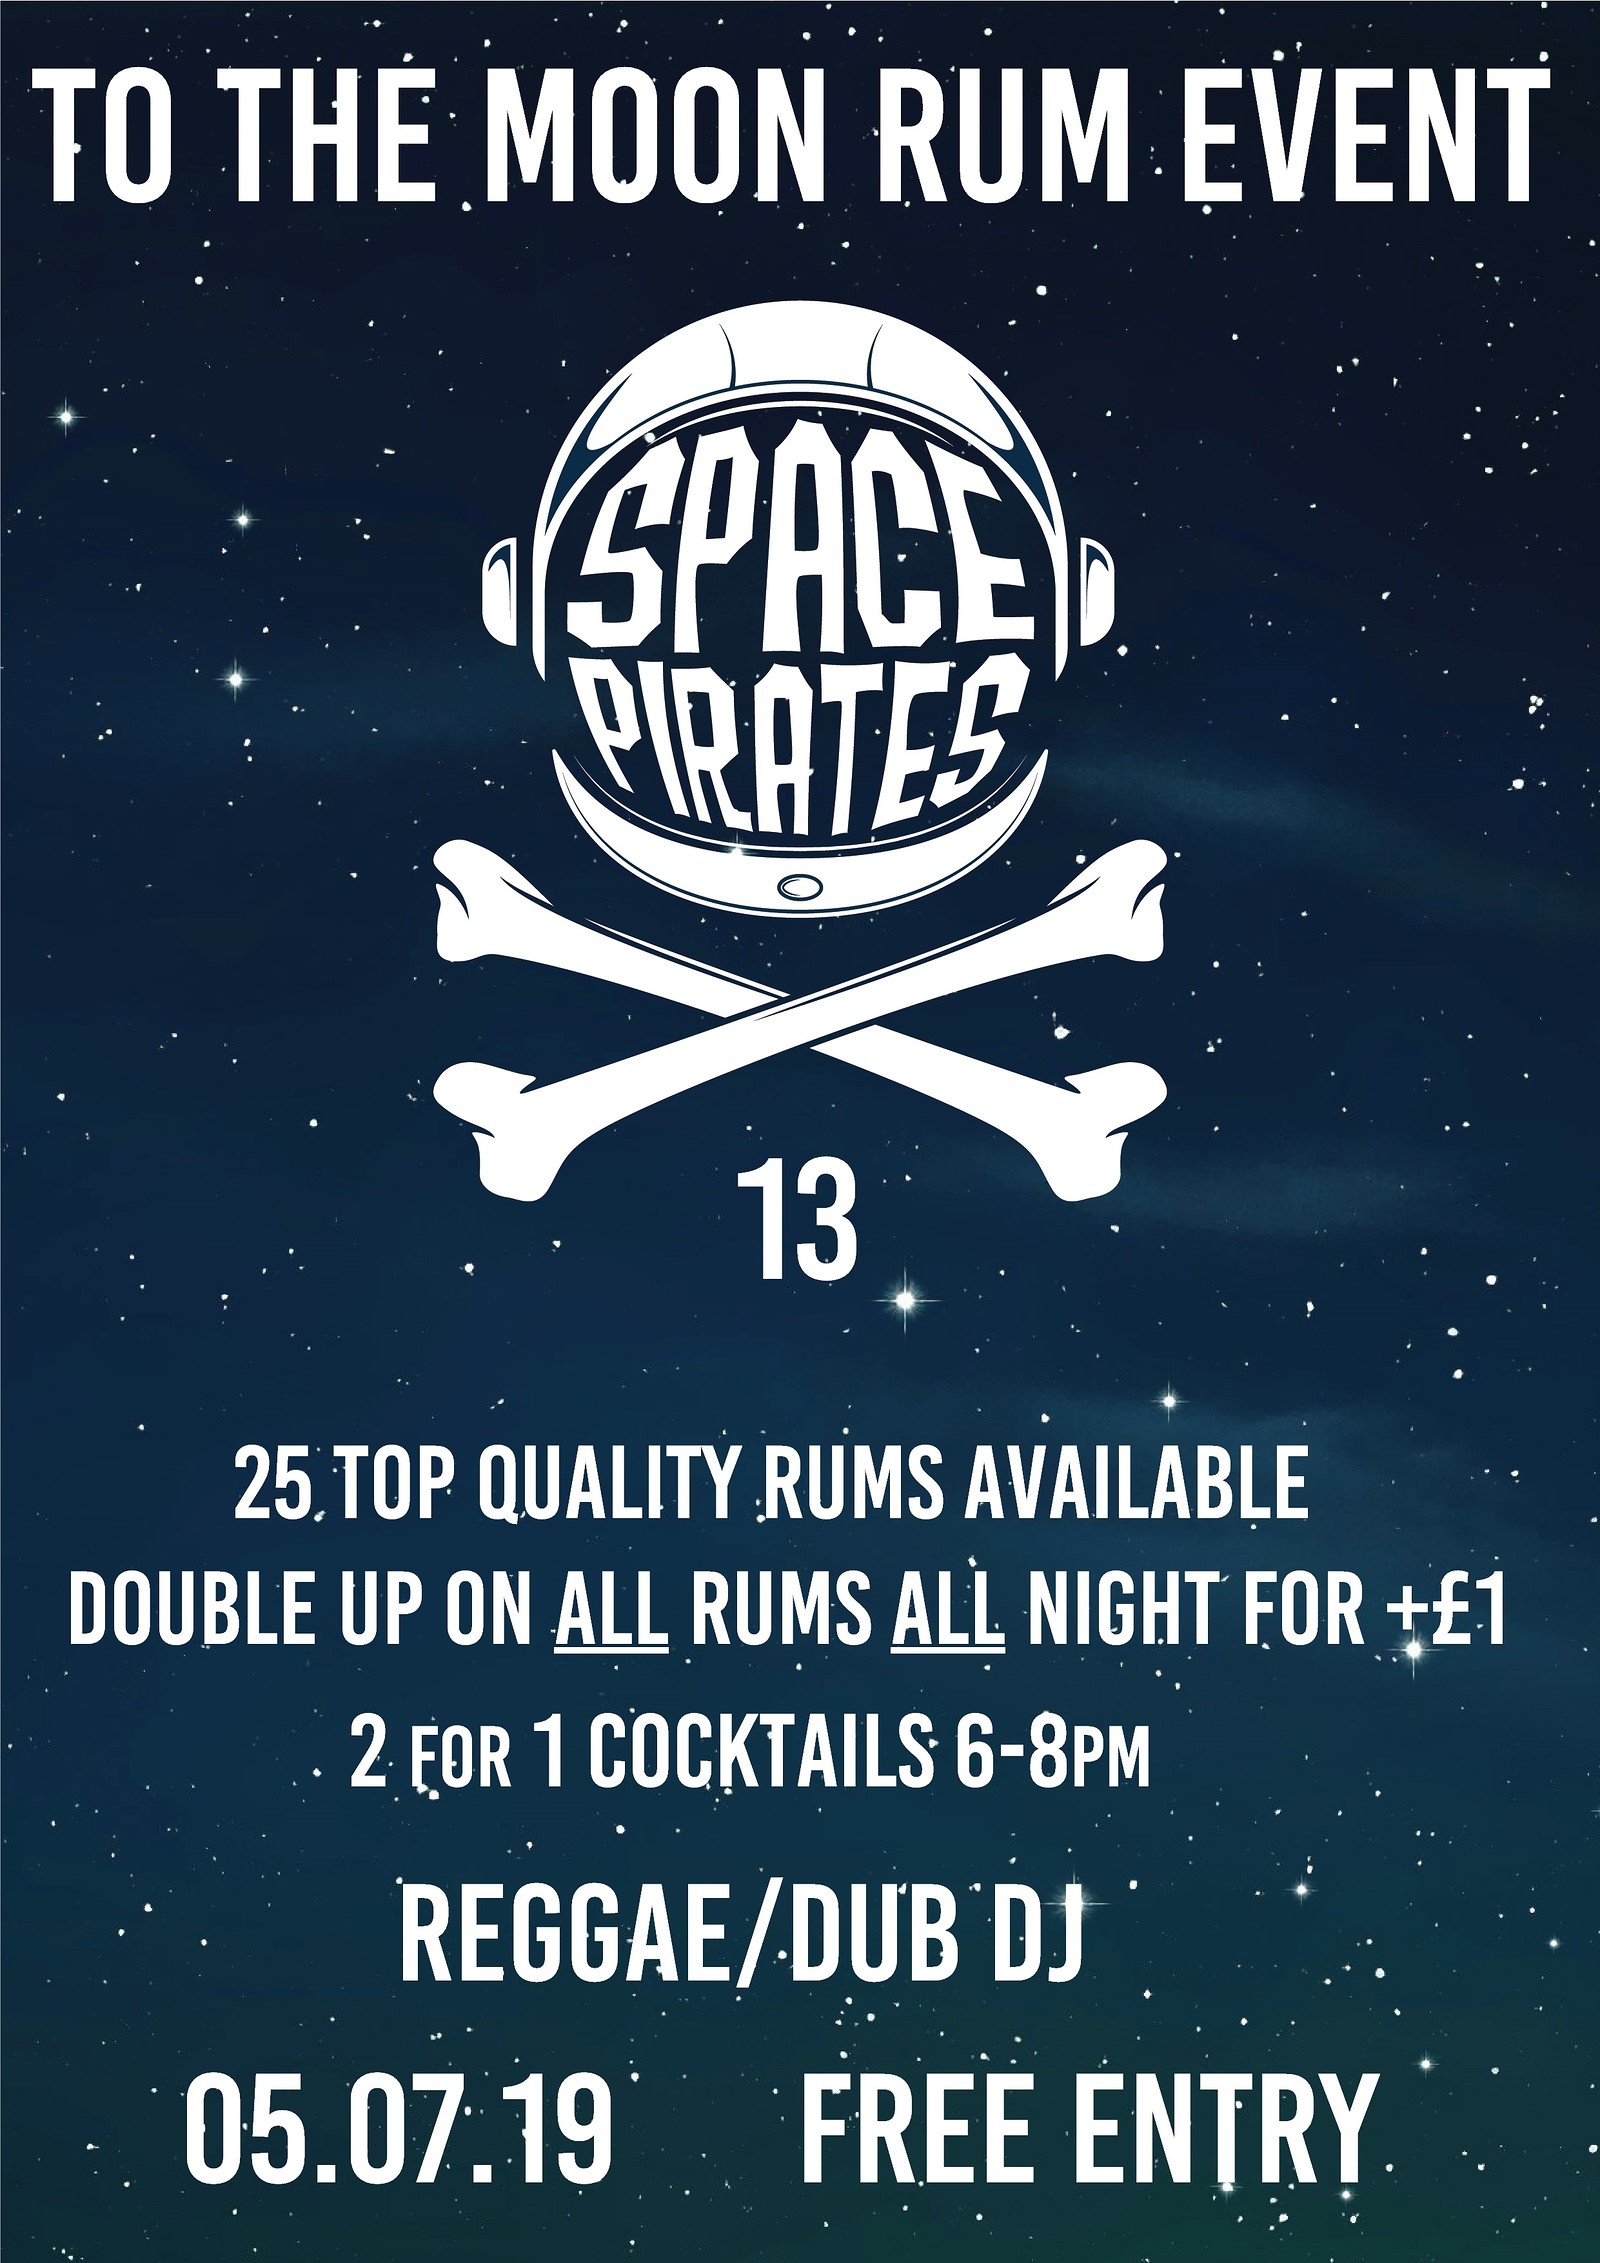 Space Pirates 13 - Rum Event at To The Moon